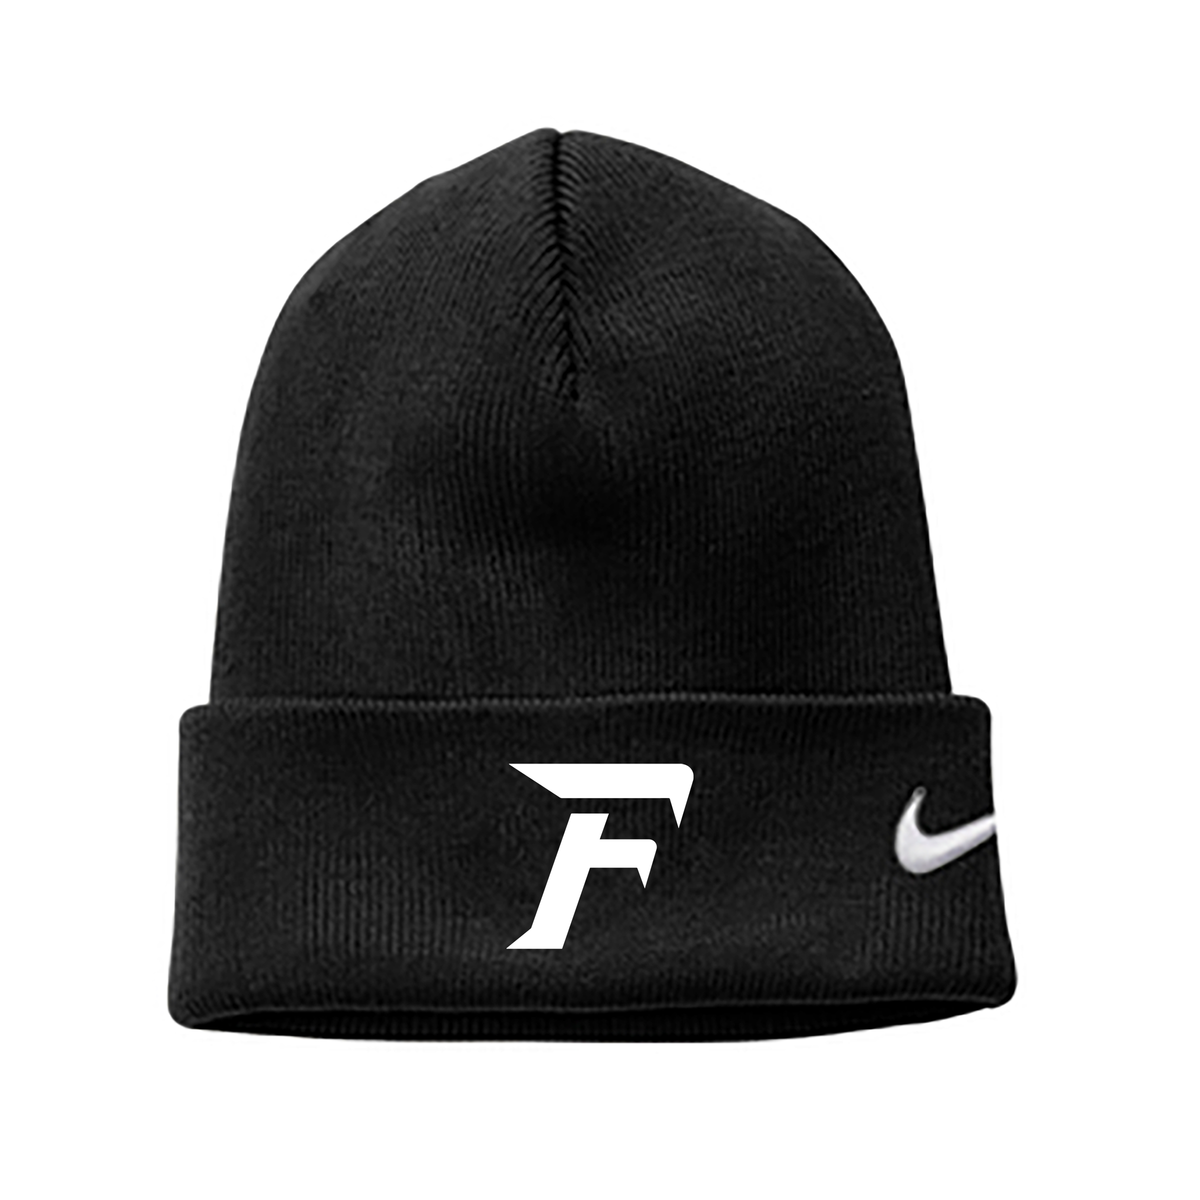 Foothill Falcons Nike Beanie